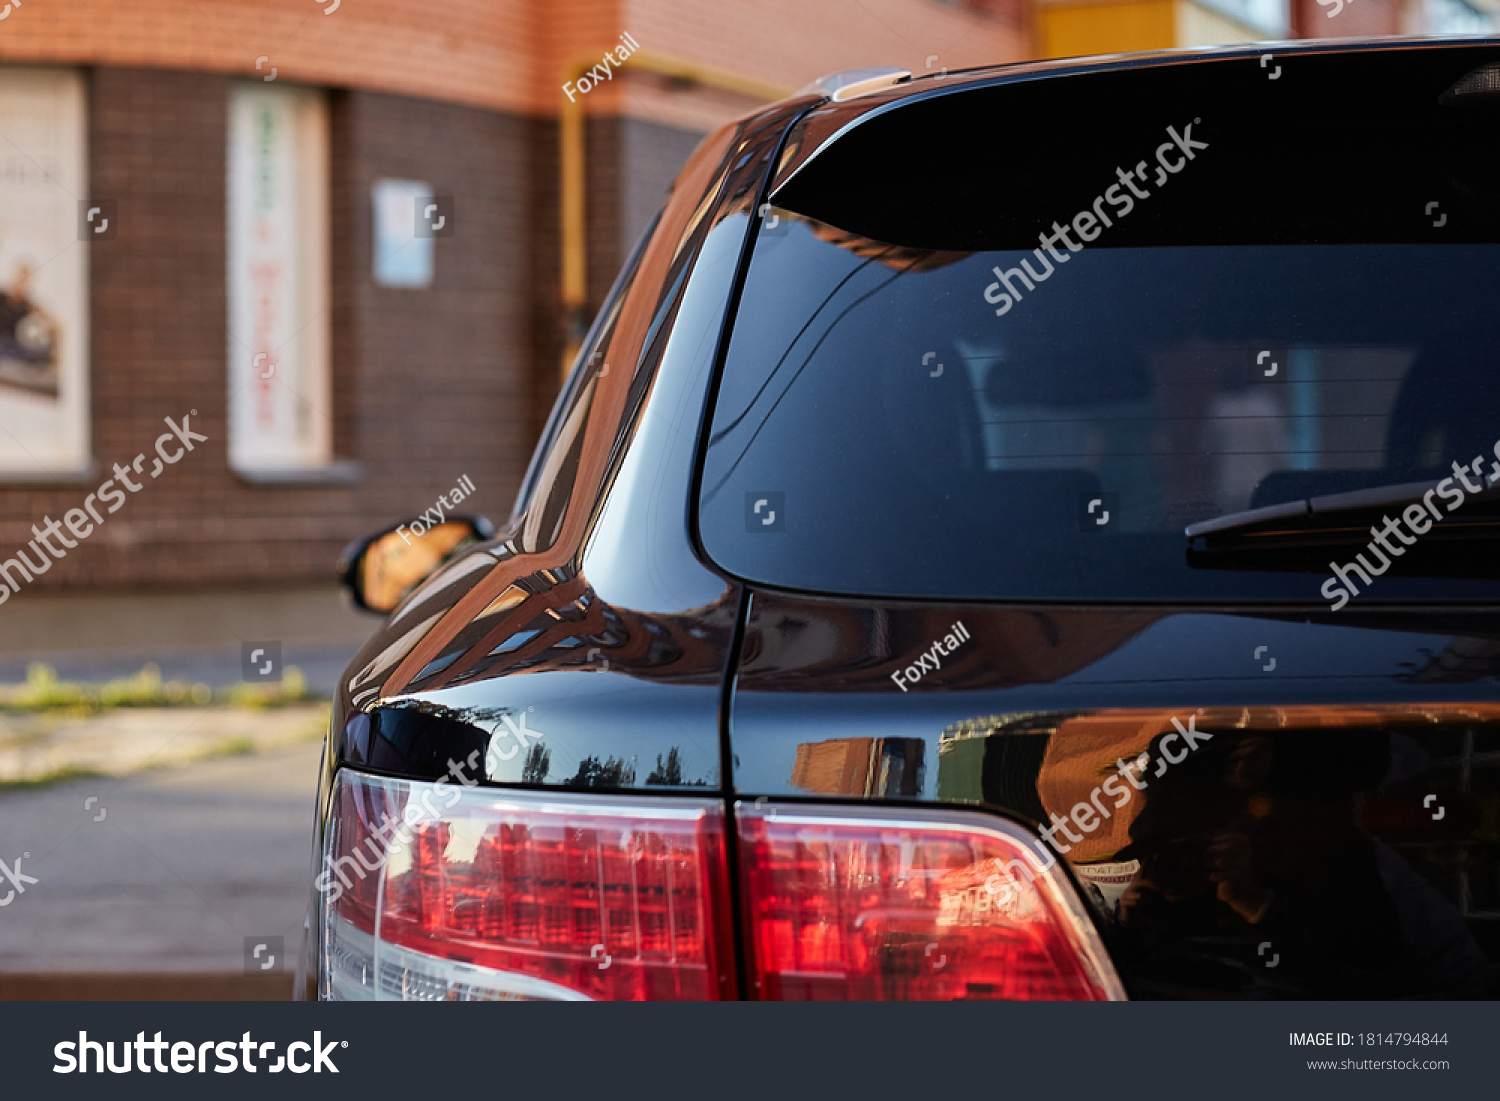 Back window of a car parked on the street in summer sunny day, rear view. Mock-up for sticker or decals #1814794844